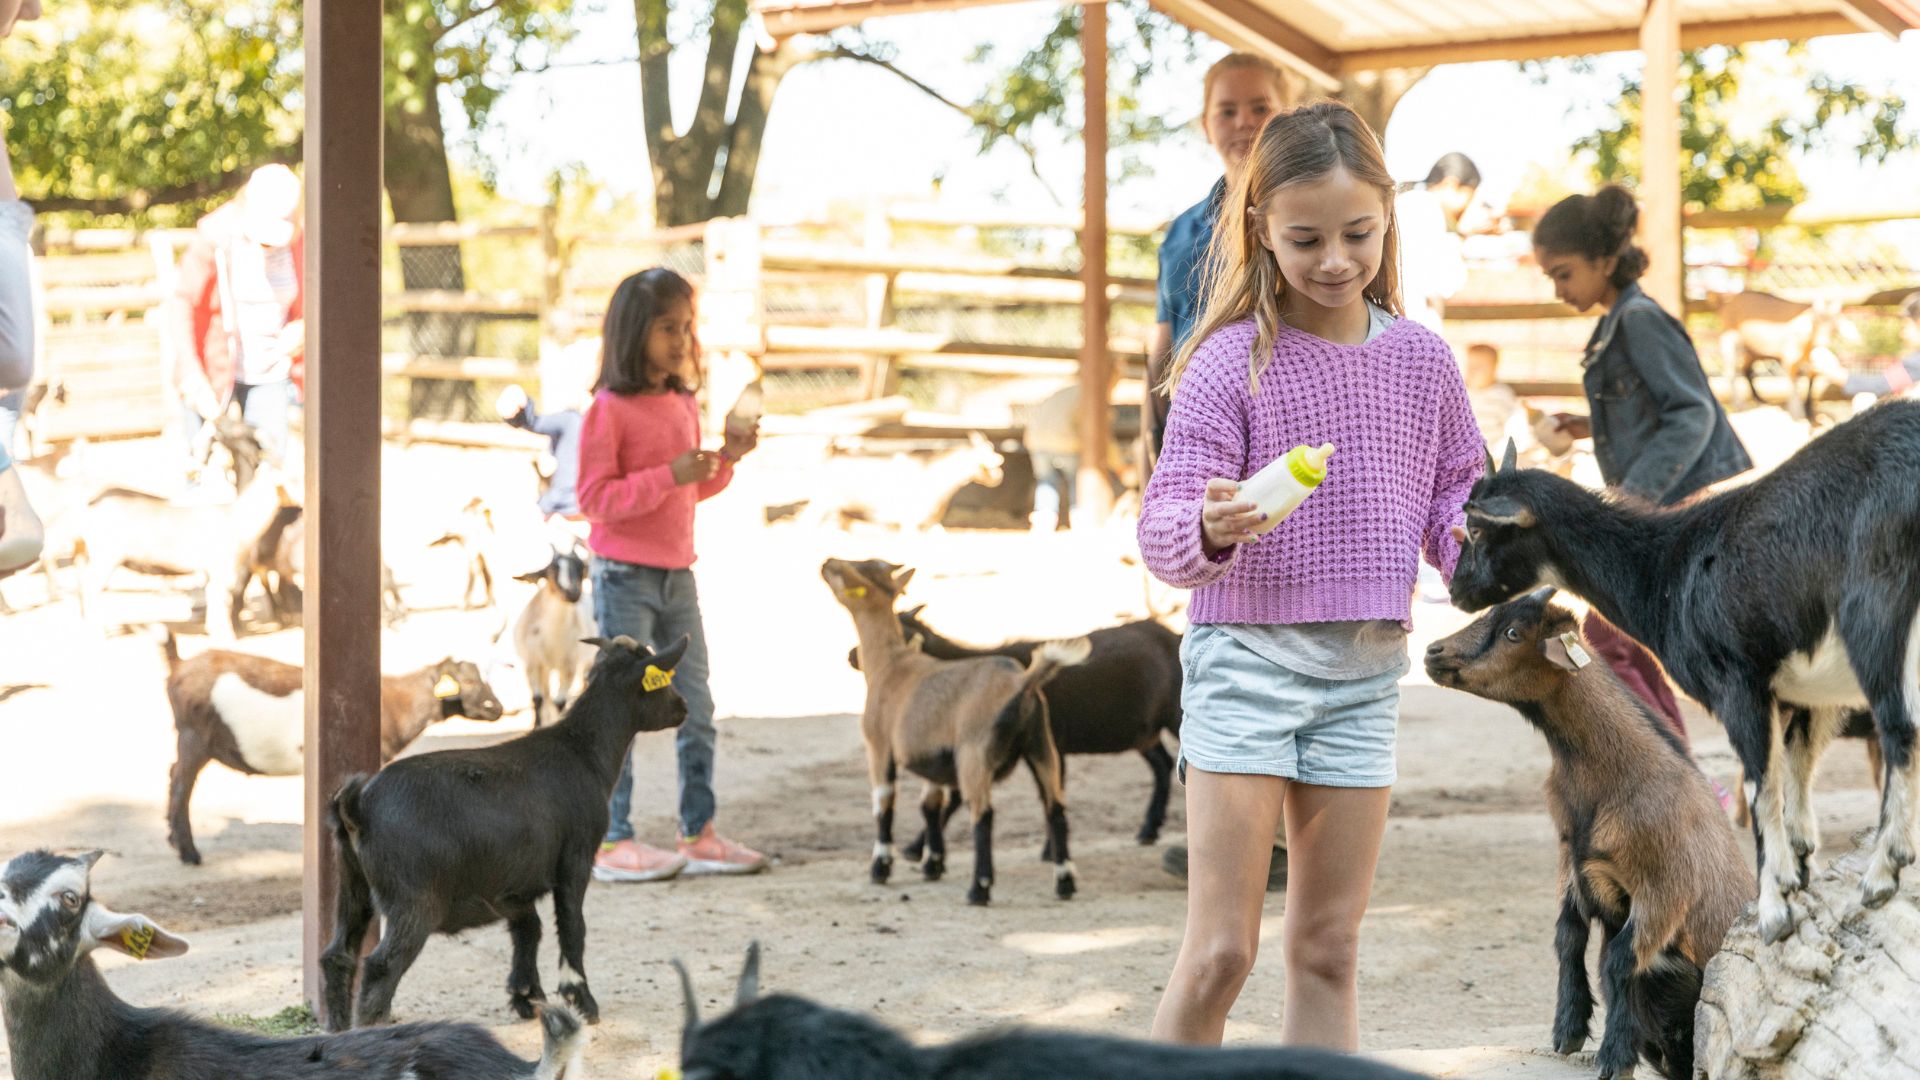 A girl feeds the goats at Grant's Farm.